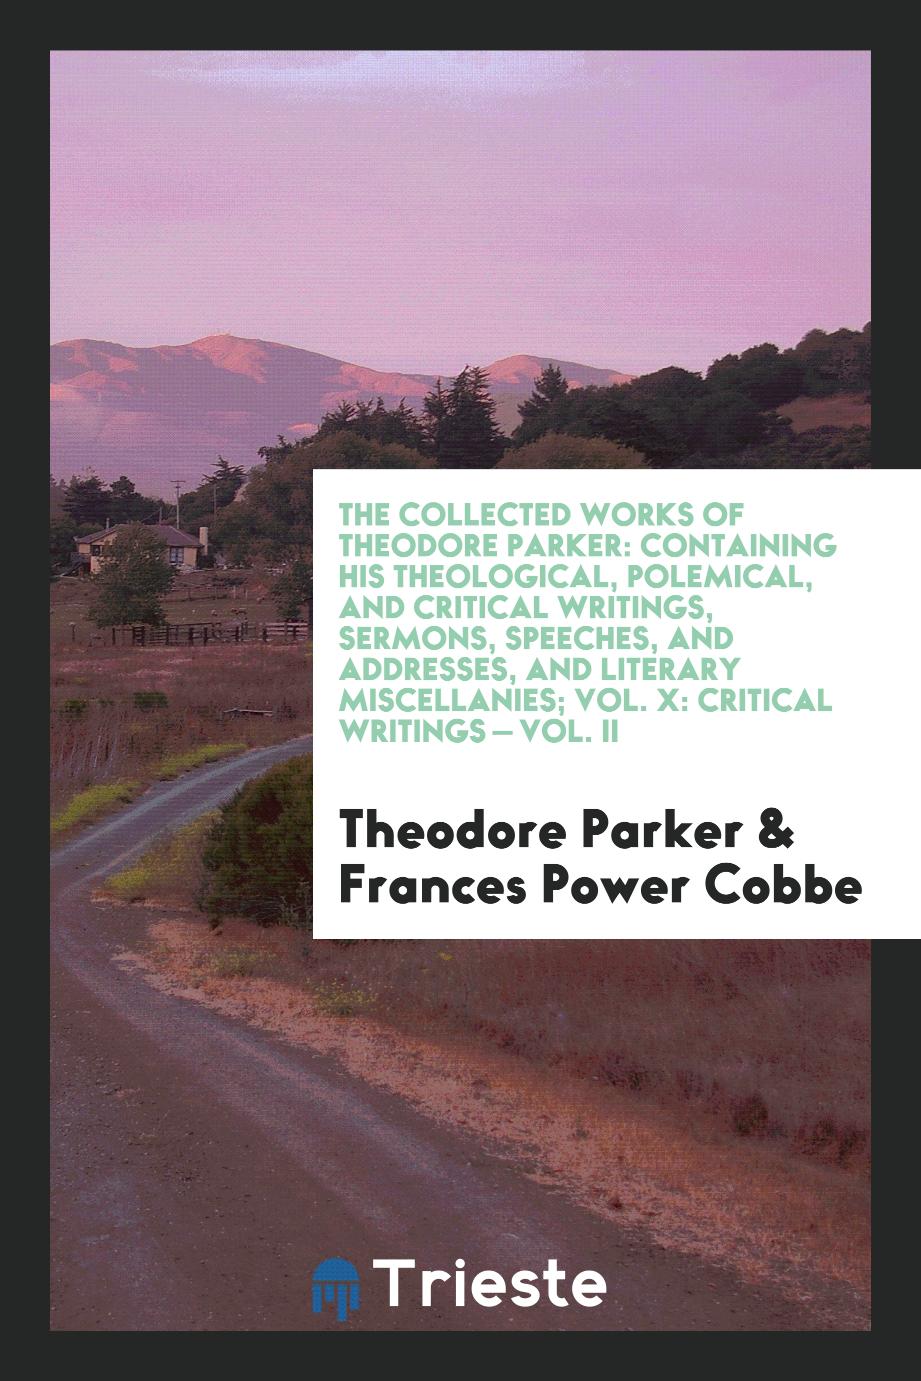 The Collected Works of Theodore Parker: Containing His Theological, Polemical, and Critical Writings, Sermons, Speeches, and Addresses, and Literary Miscellanies; Vol. X: Critical Writings — Vol. II